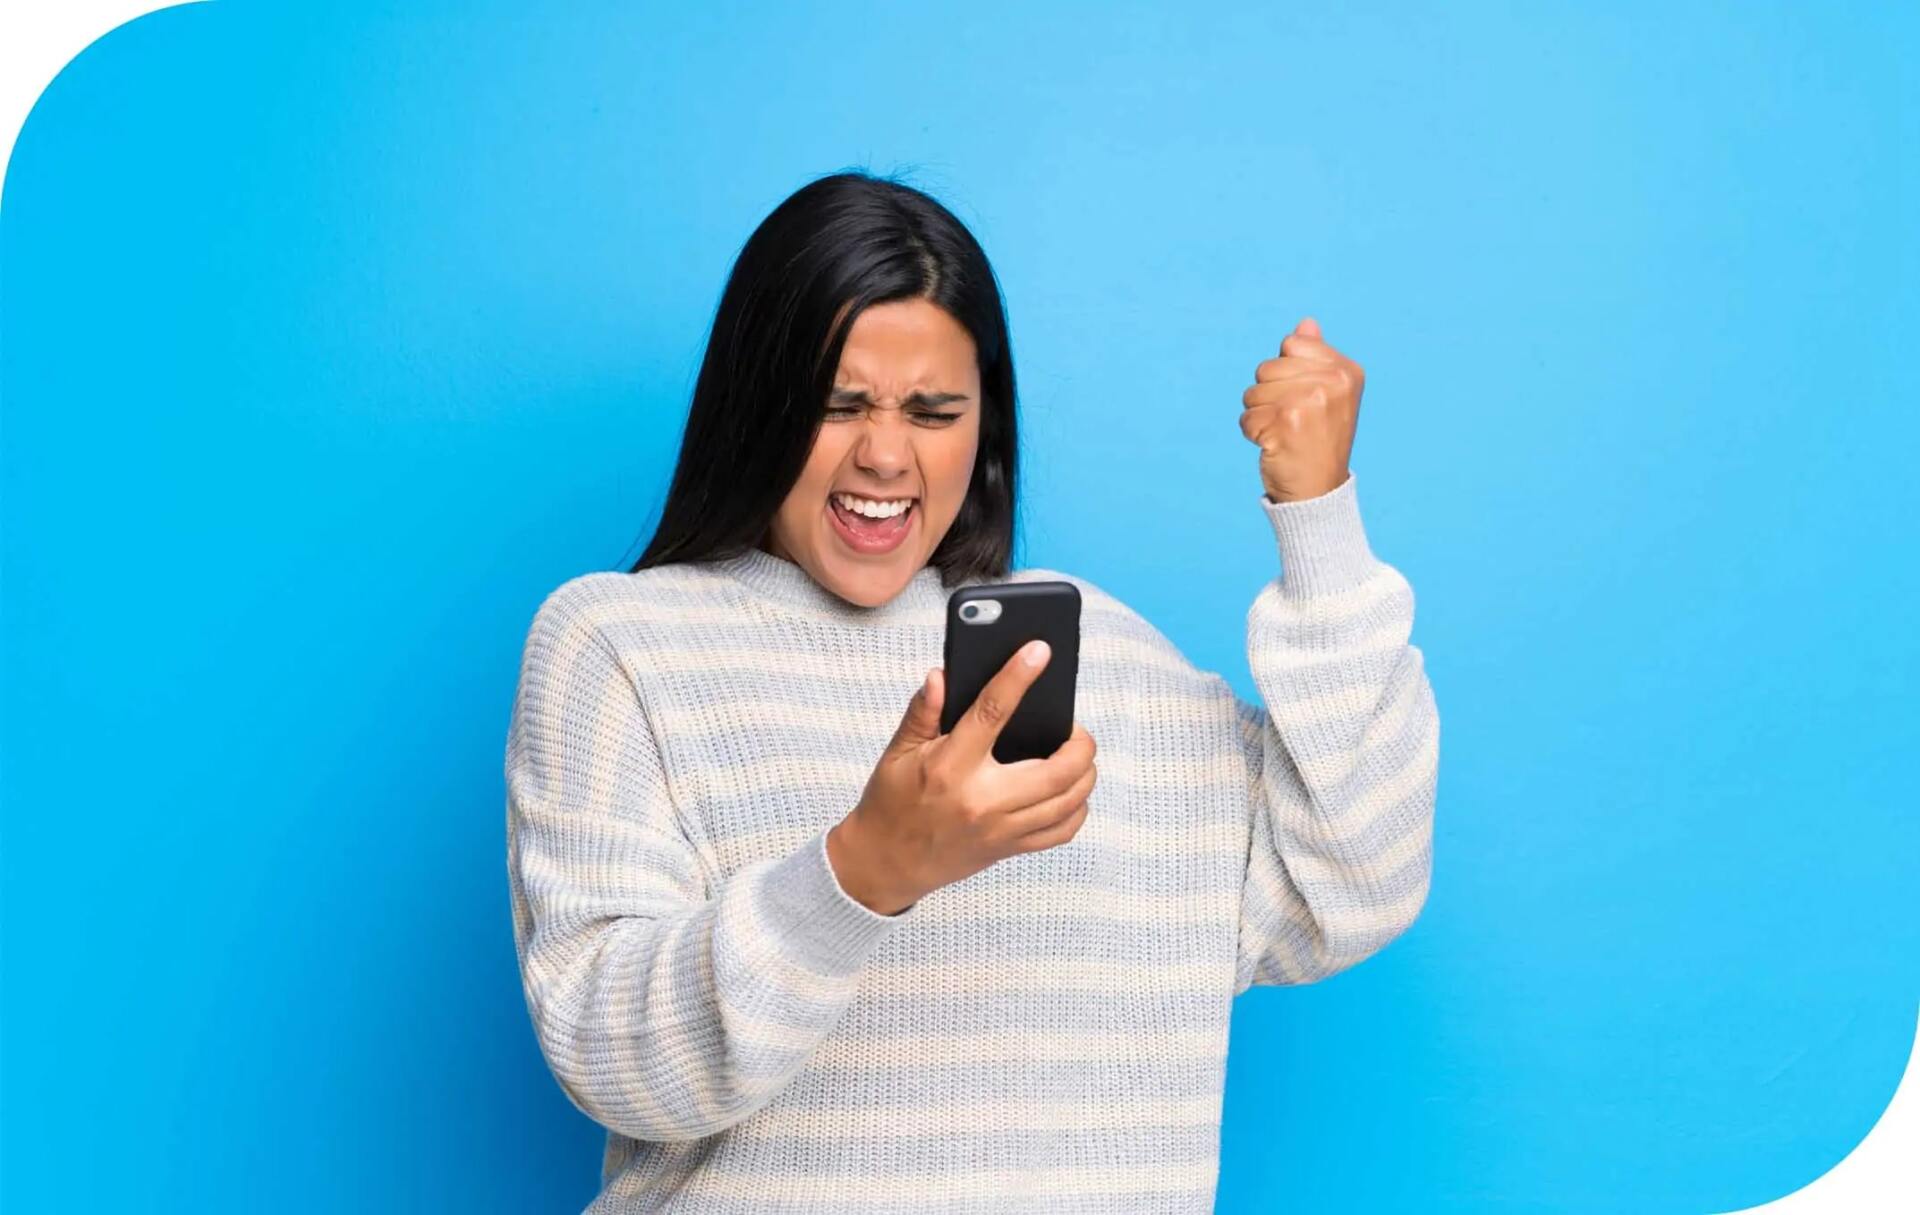 Excited woman holding a phone